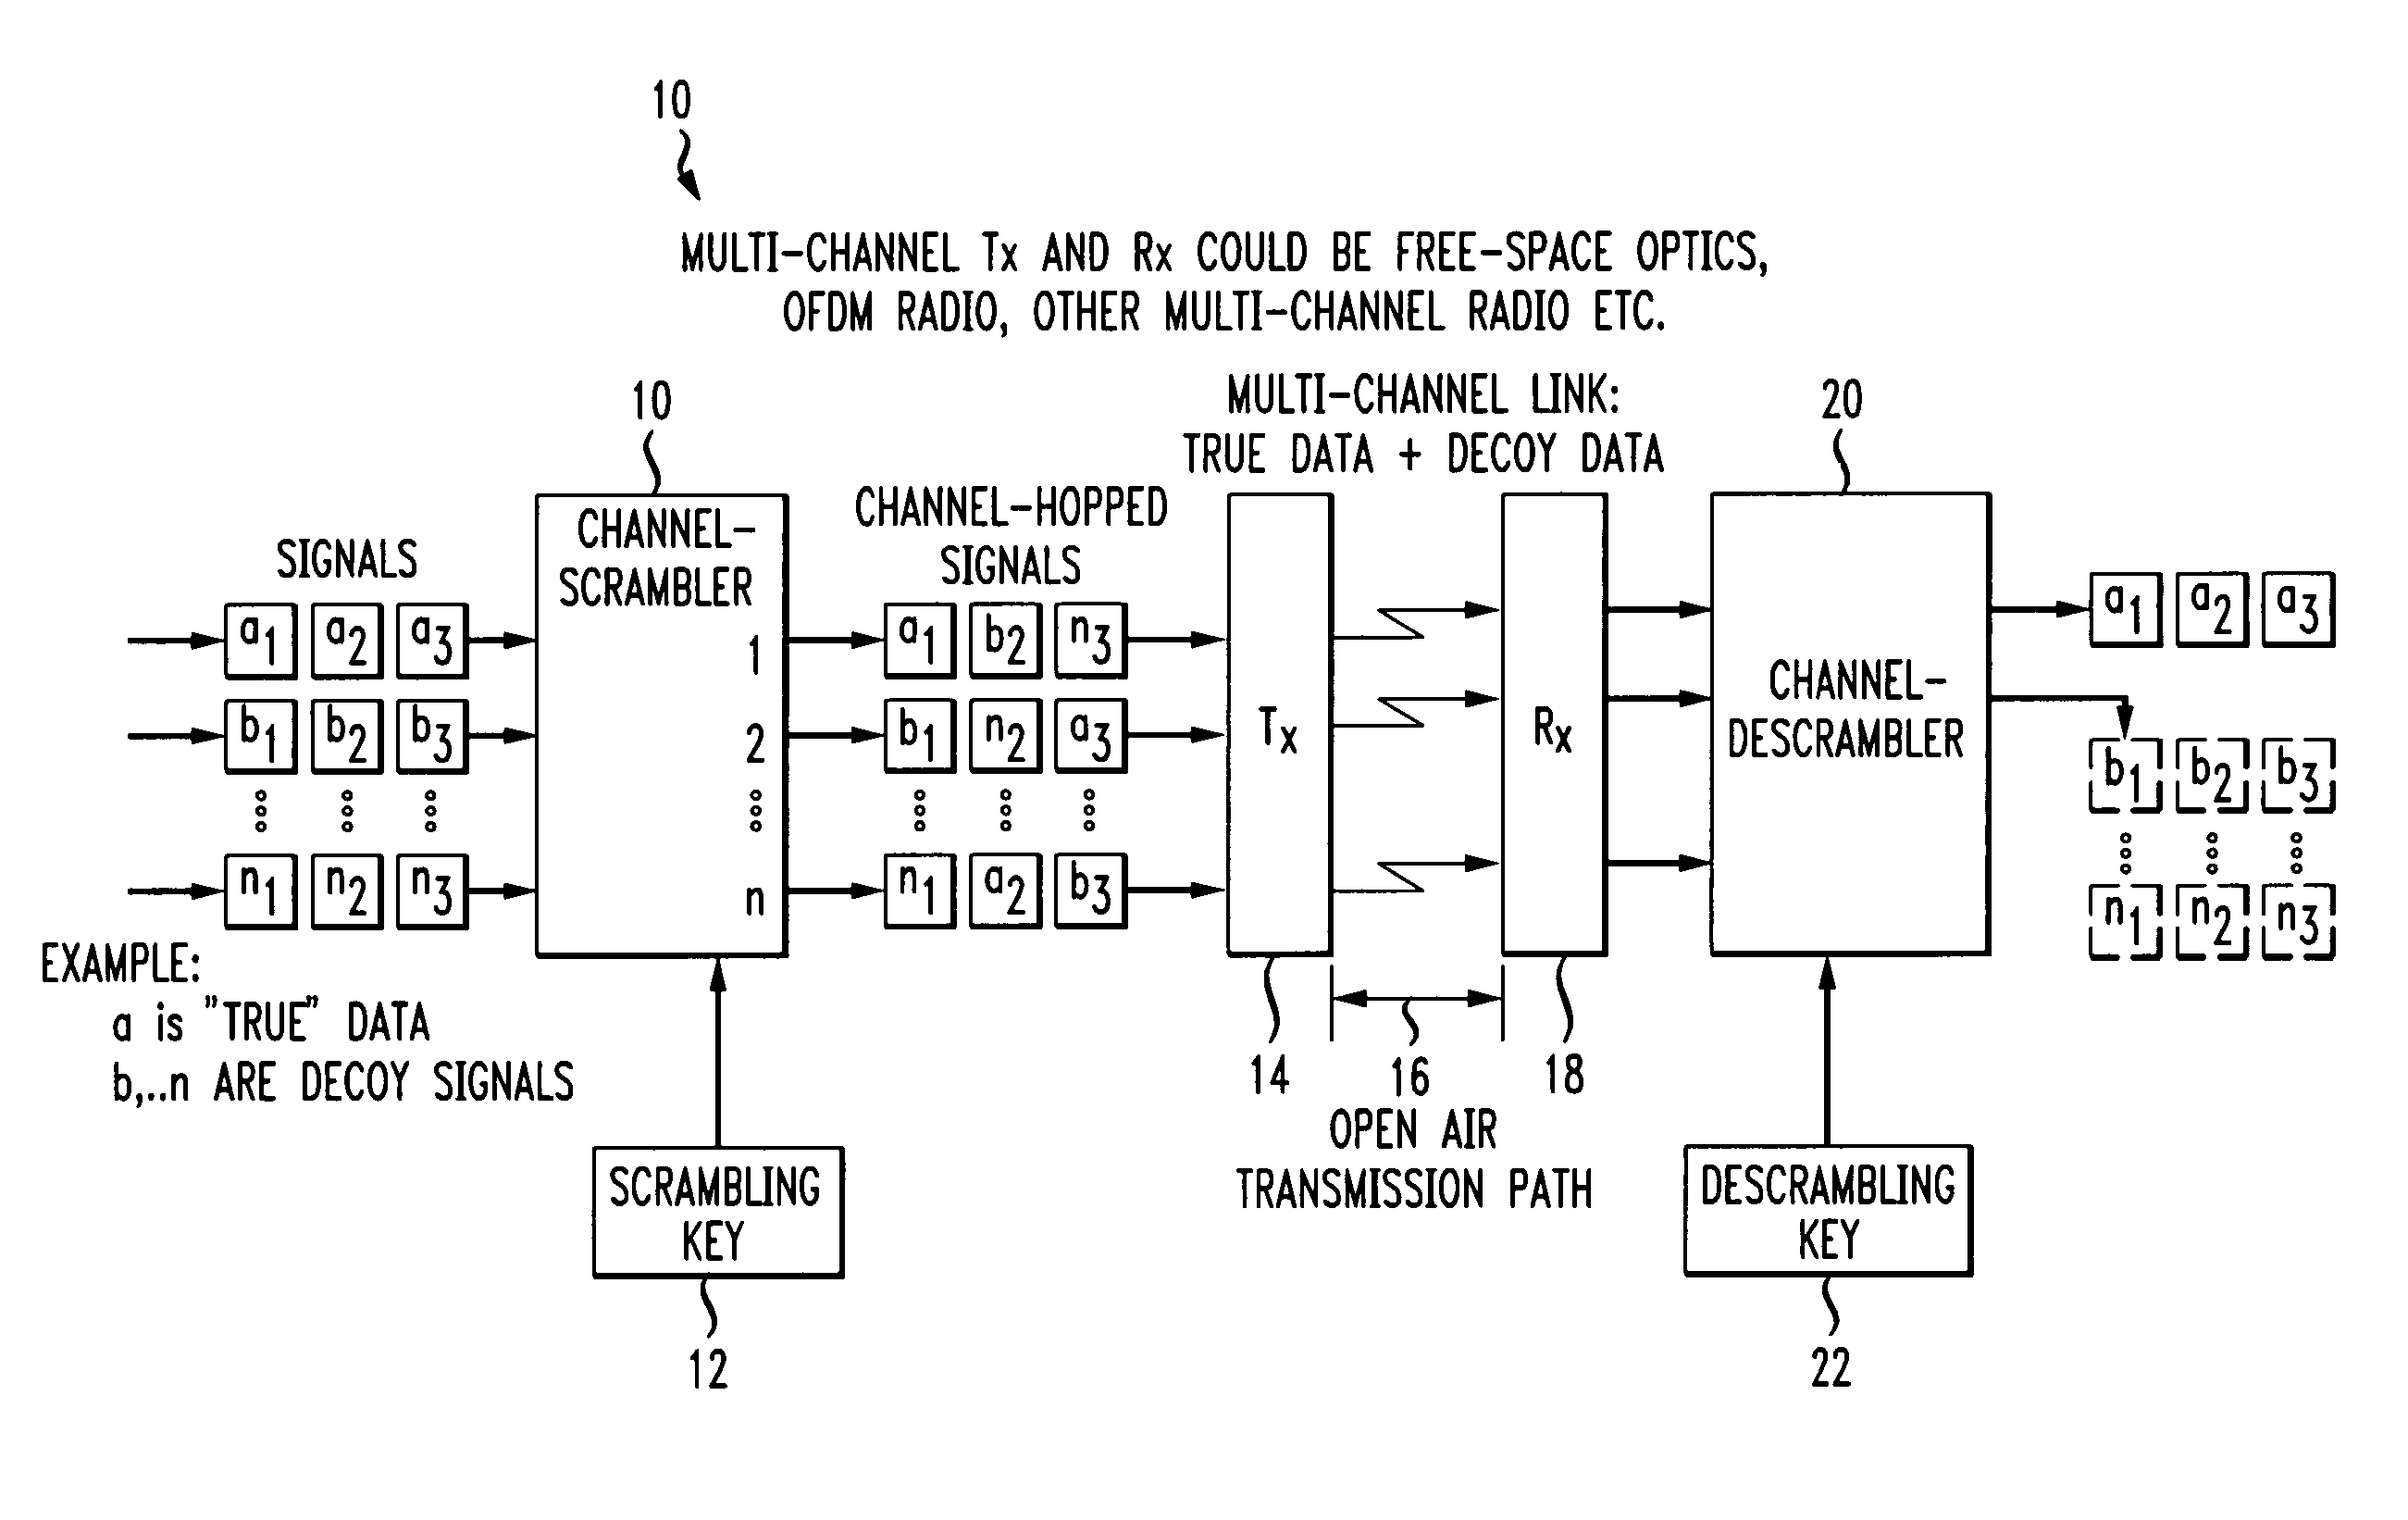 Secure open-air communication system utilizing multi-channel decoyed transmission